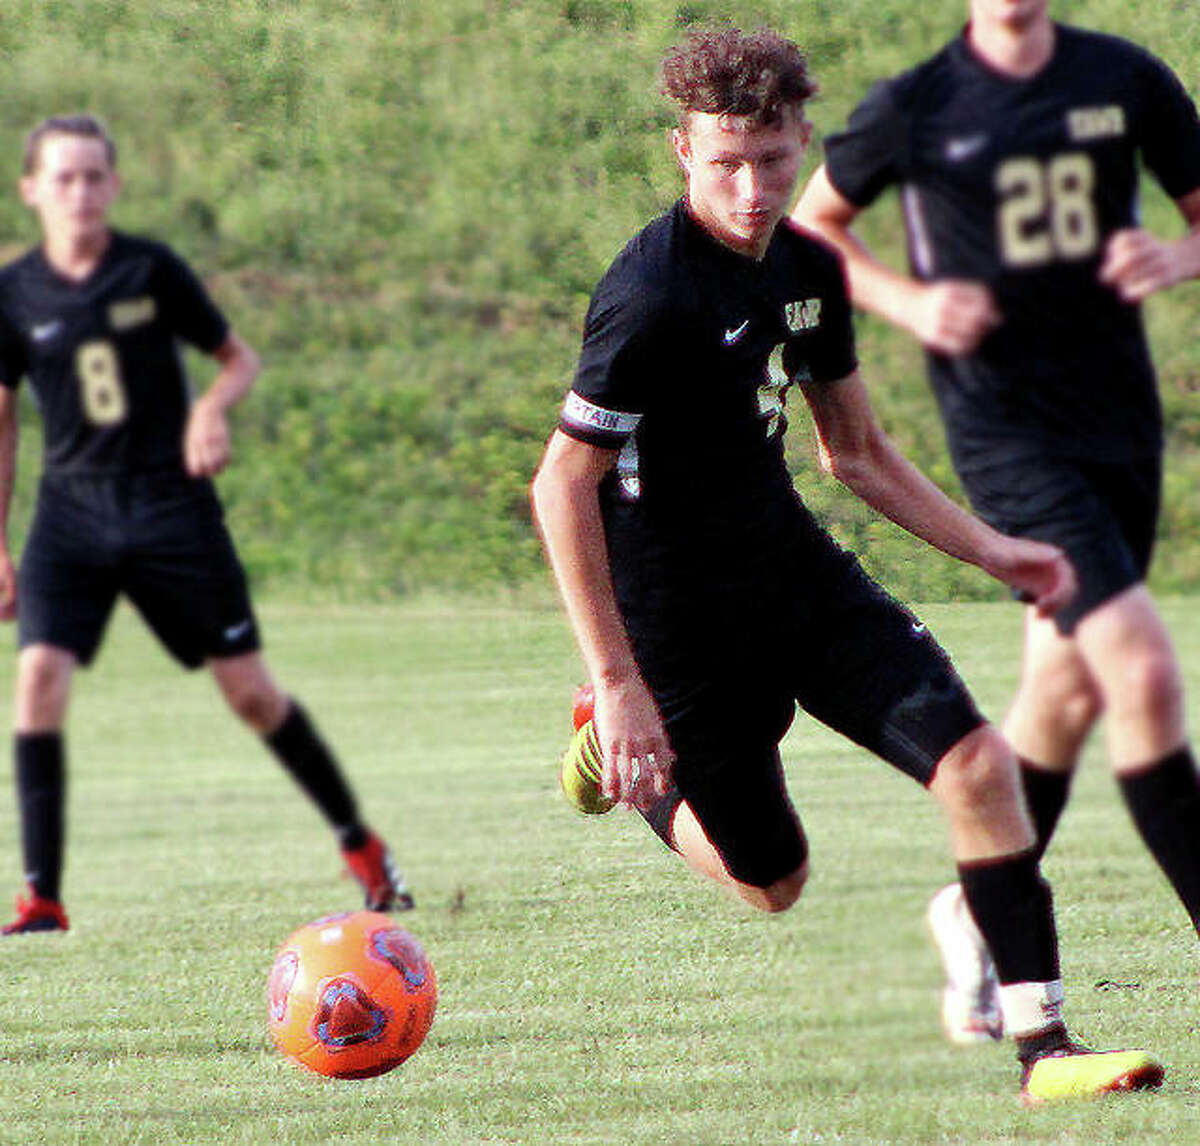 East Alton-Wood River’s Ethan Moore (4) moves the ball during Tuesday’s 2-1 victory over Carlyle at Wood River Soccer Park. Moore scored both Oilers goals and has scored 28 on the season.